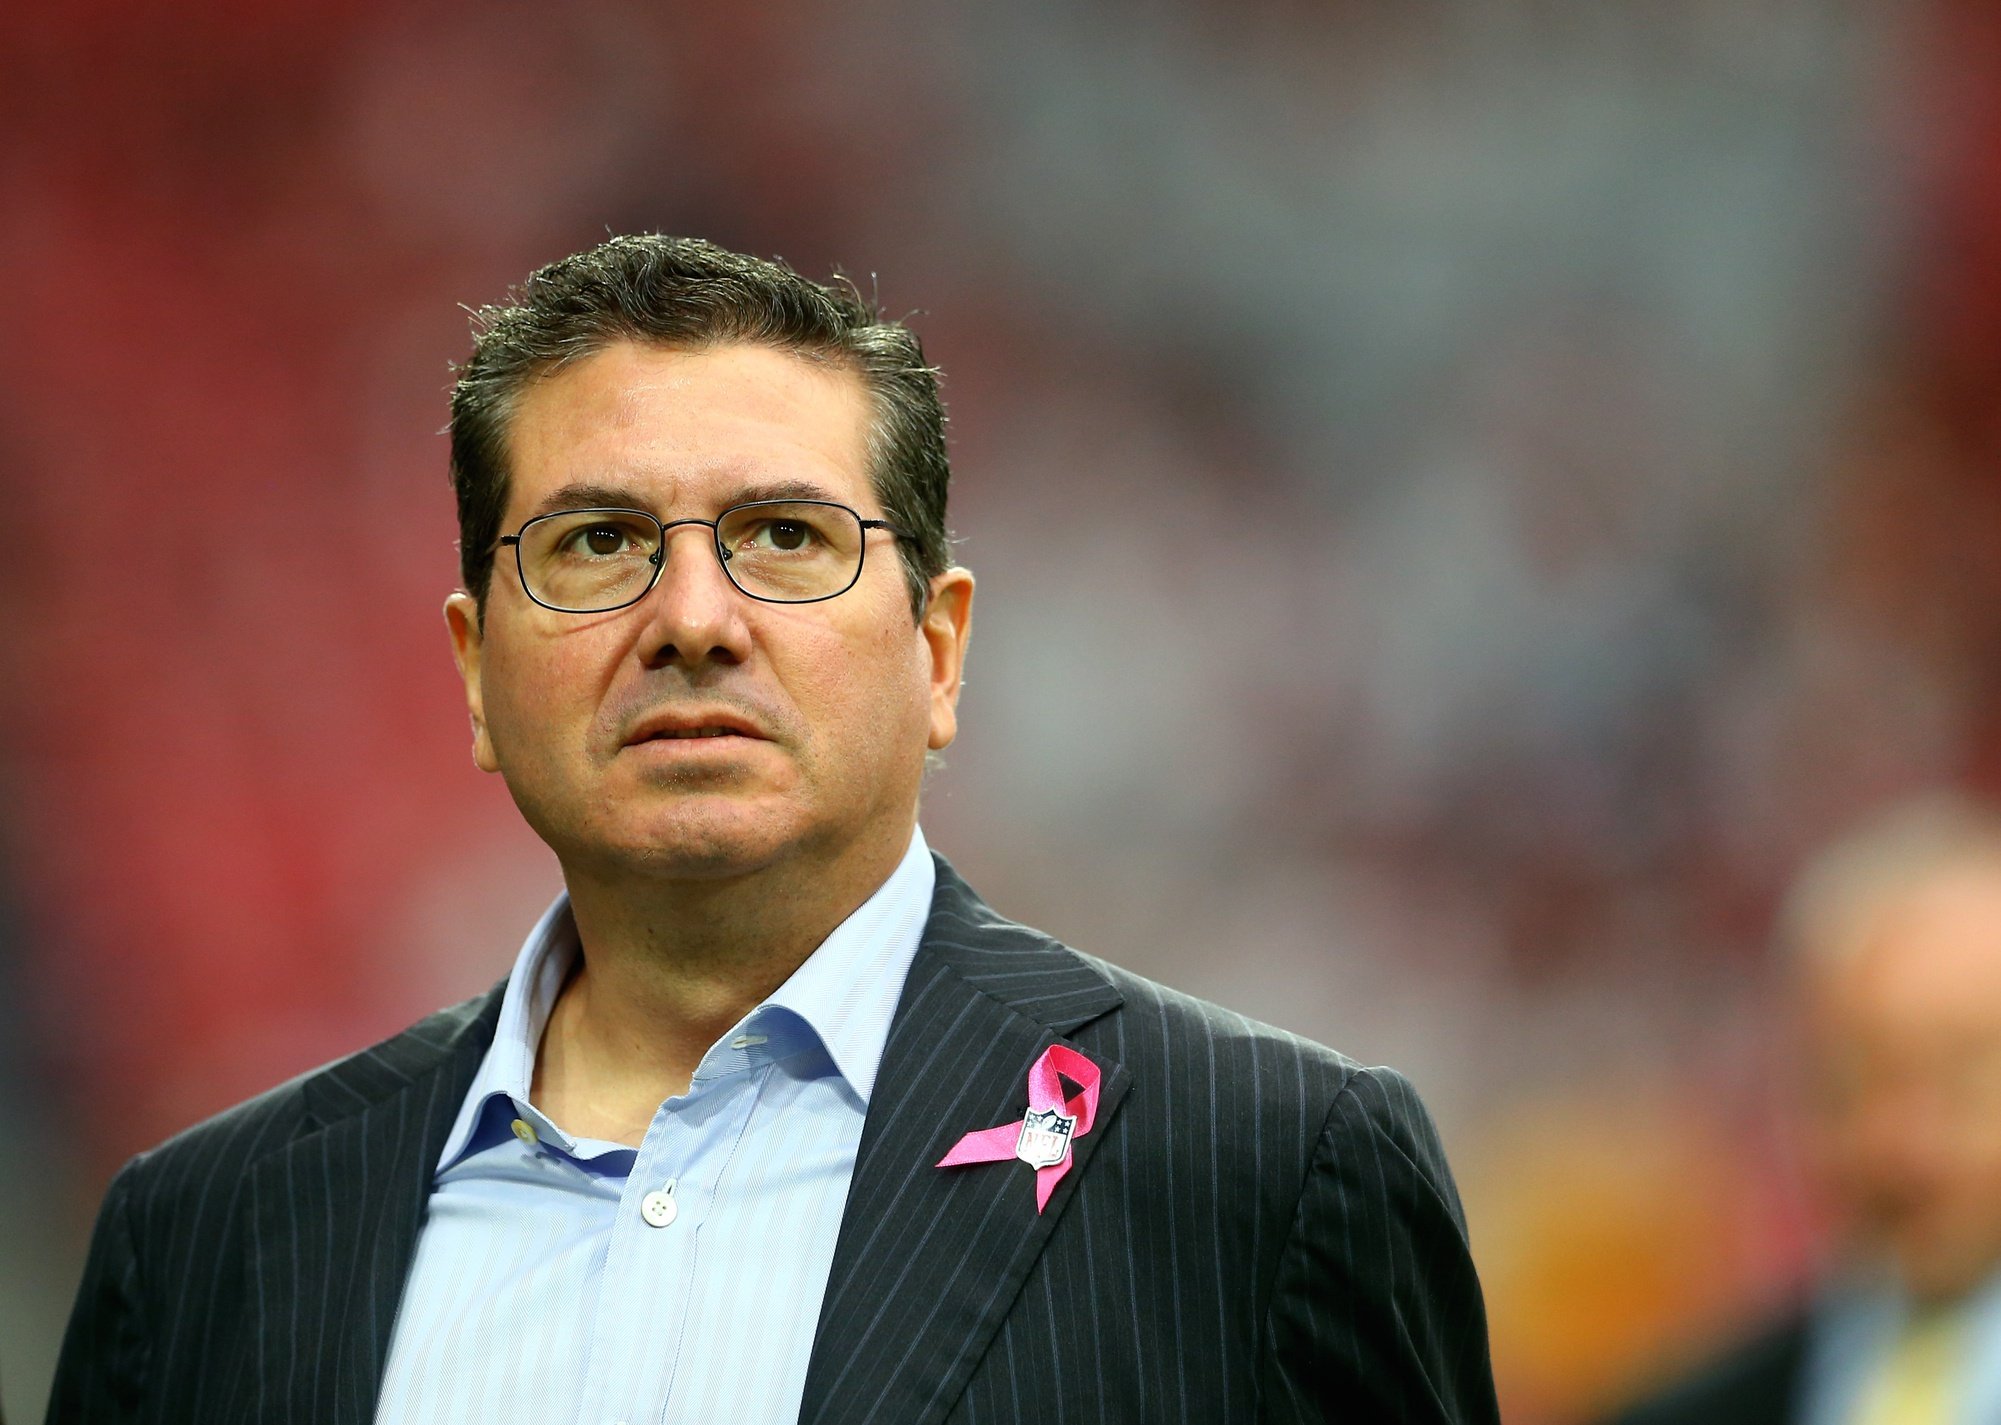 Why Dan Snyder’s Ouster as Commanders Owner Will Take Time - Front Office Sports